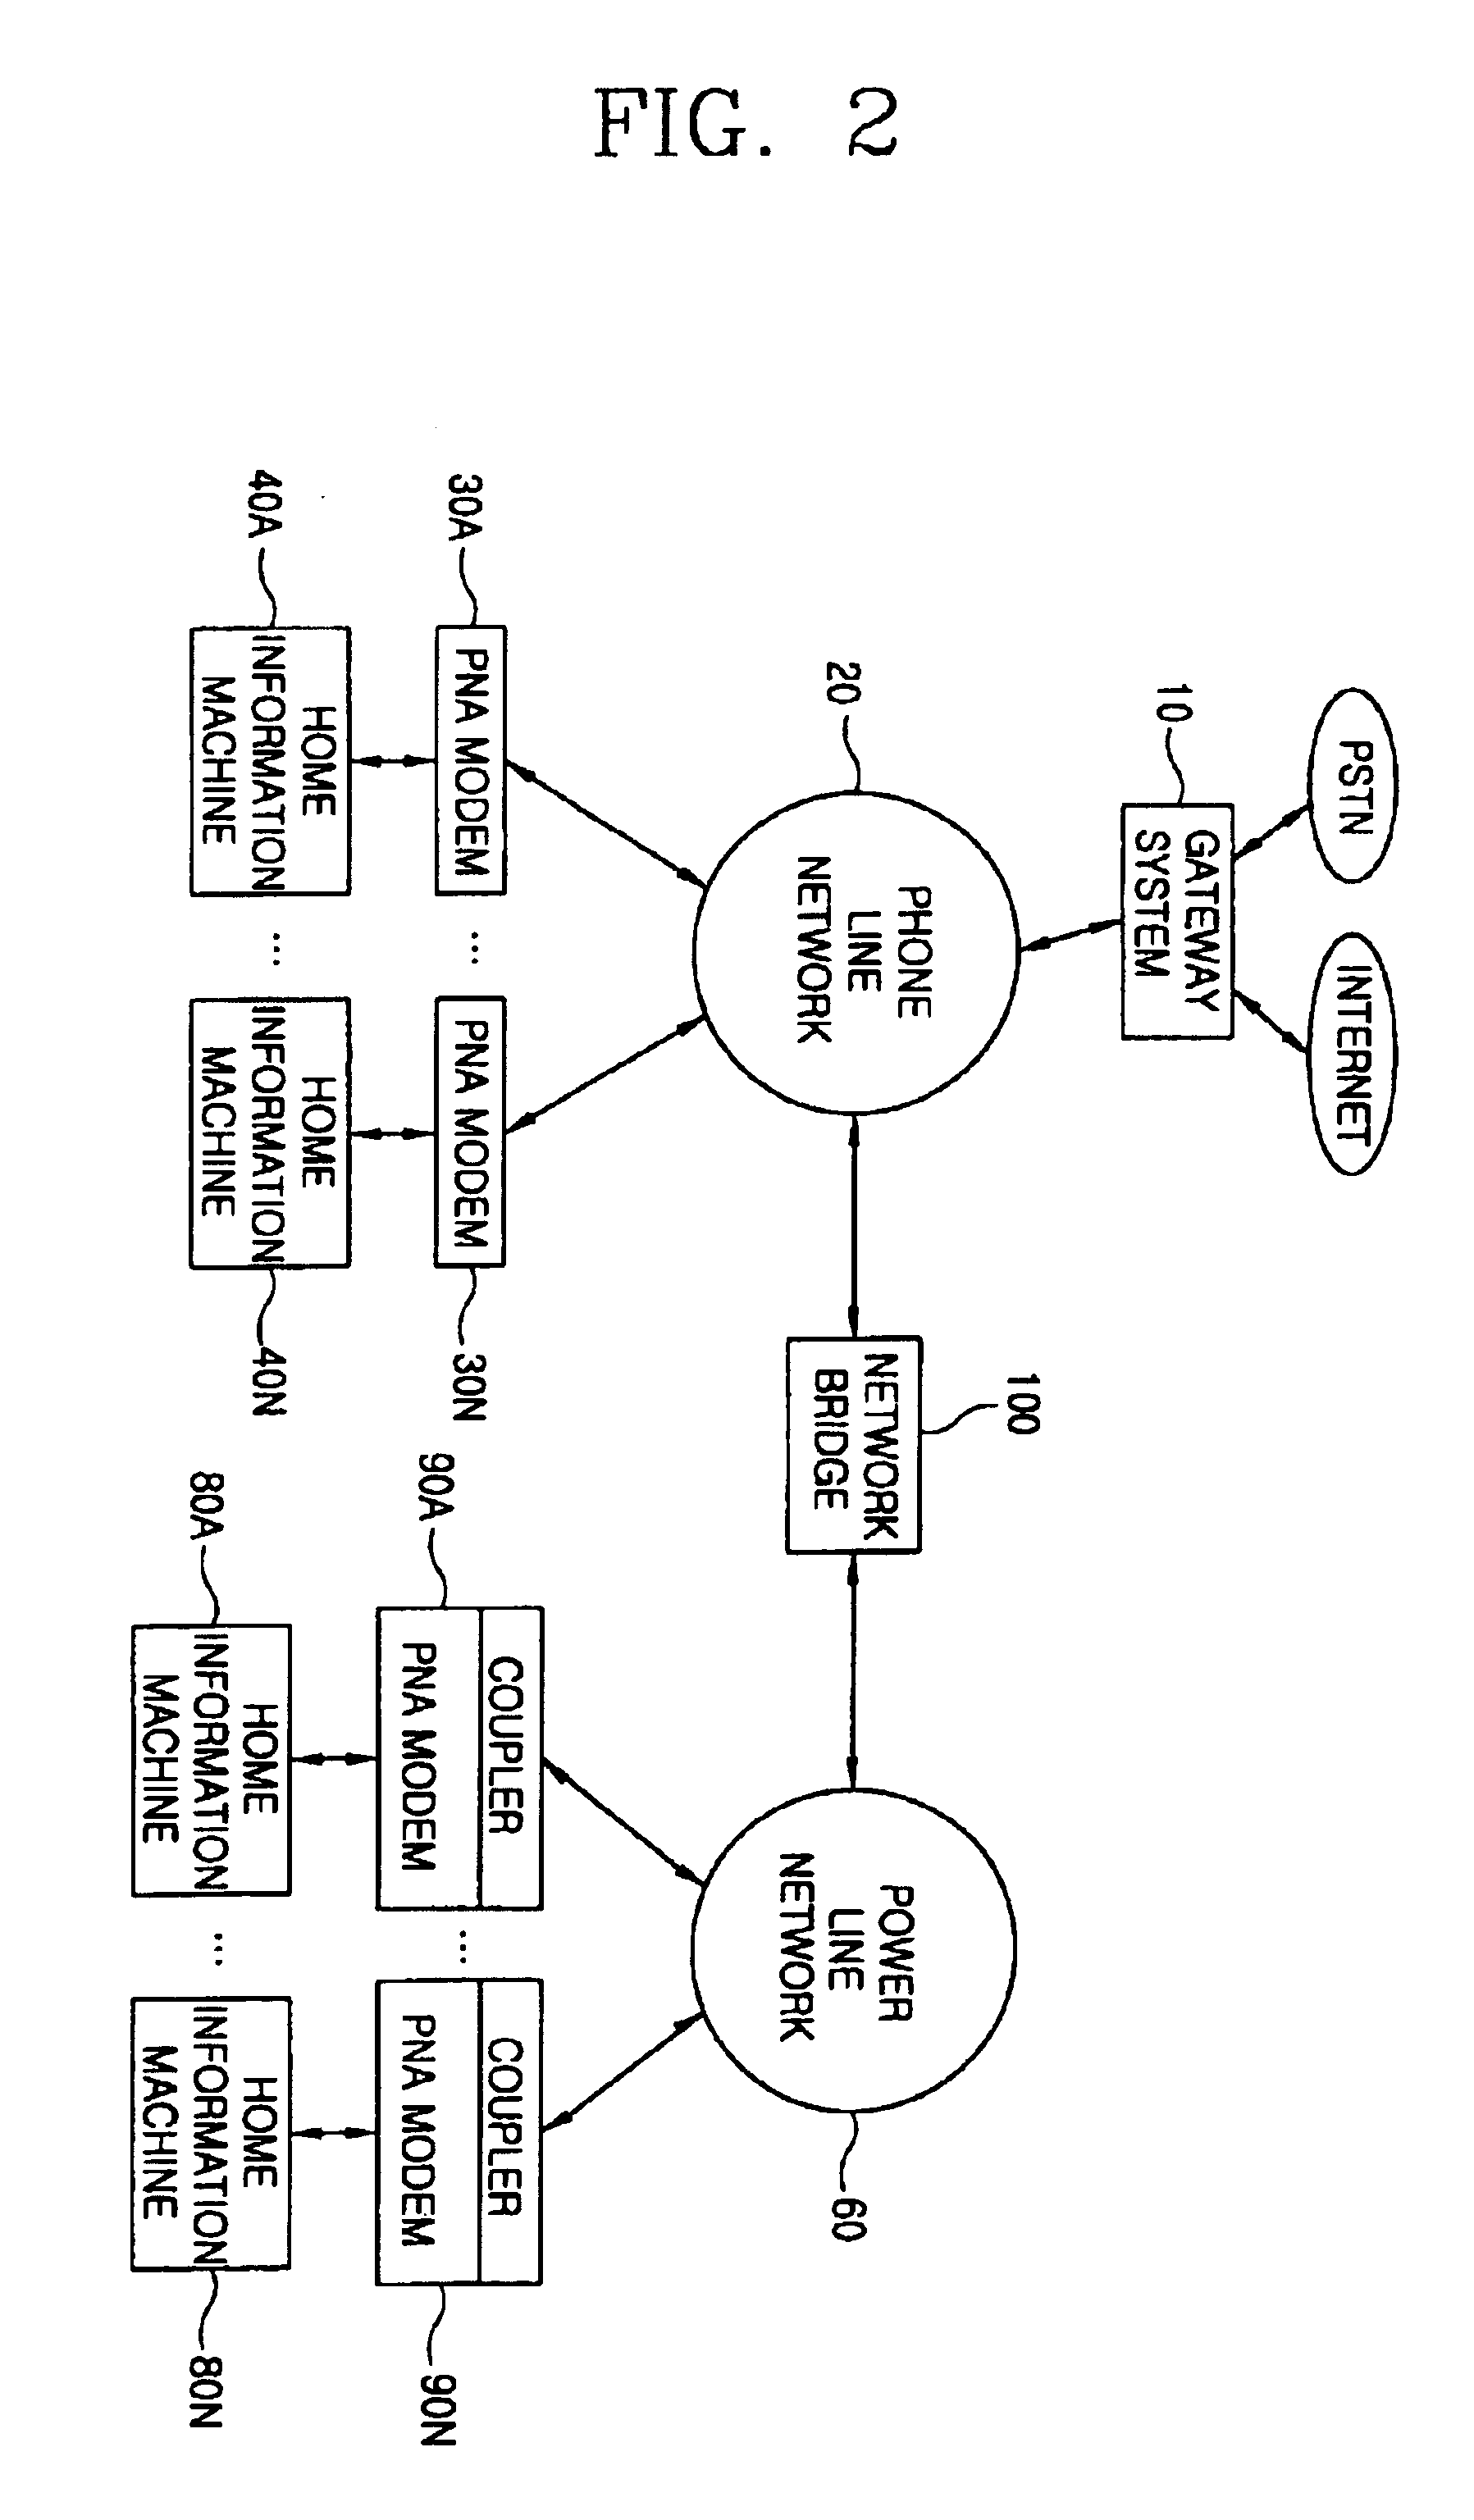 Network infrastructure integrated system